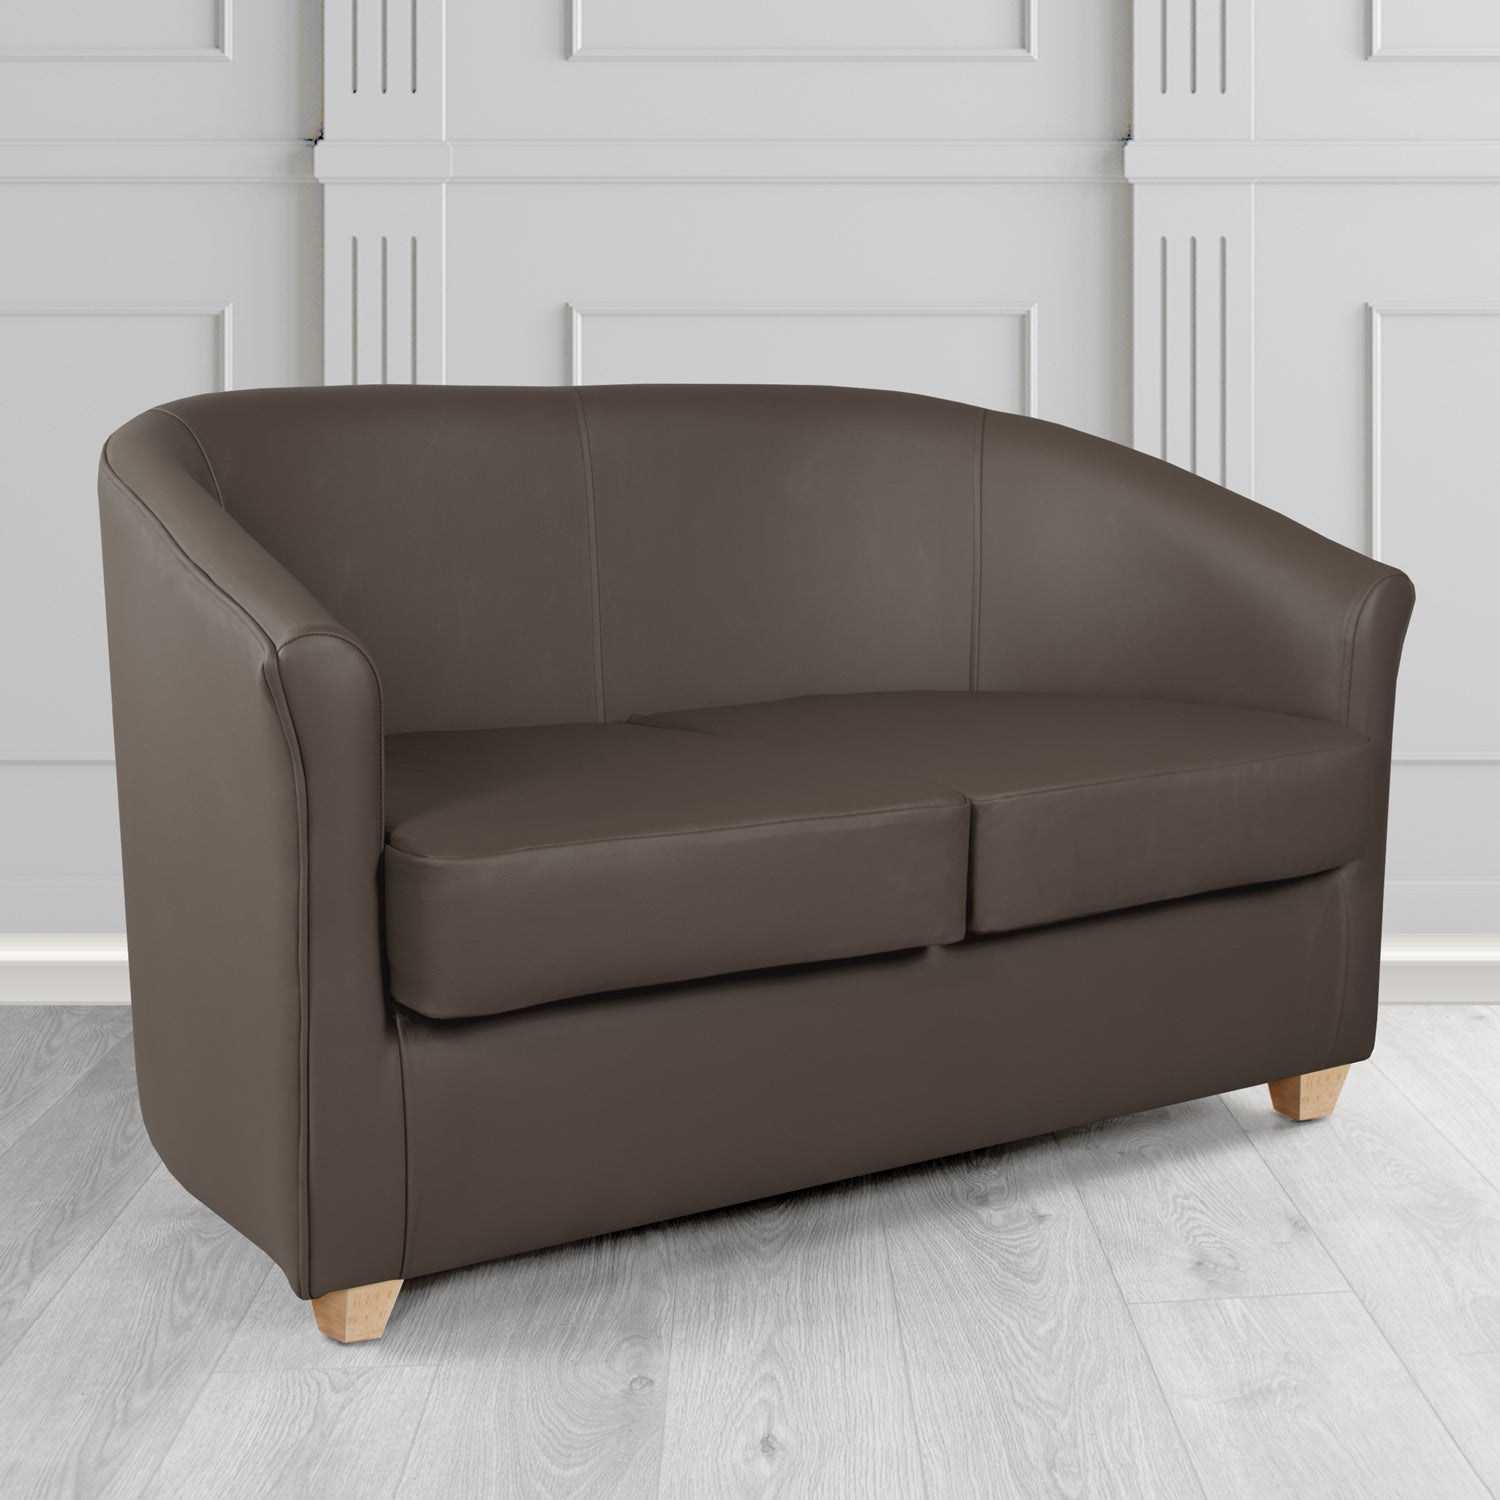 Cannes 2 Seater Tub Sofa in Madrid Chocolate Faux Leather - The Tub Chair Shop